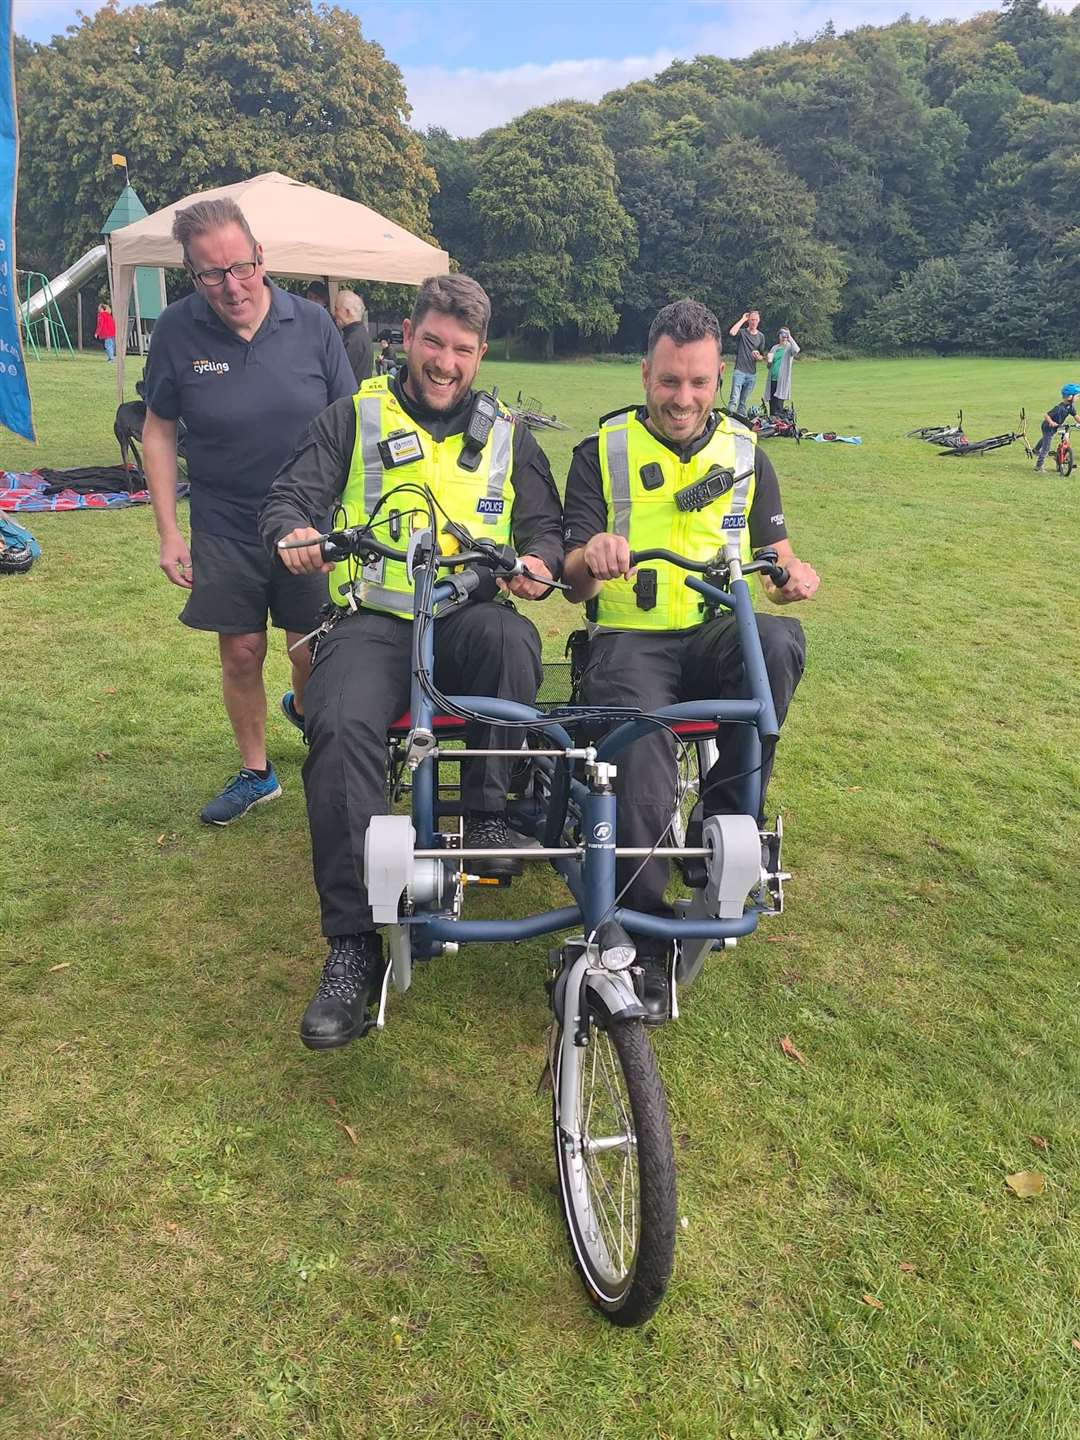 Local Bobbies on a tandem beat!